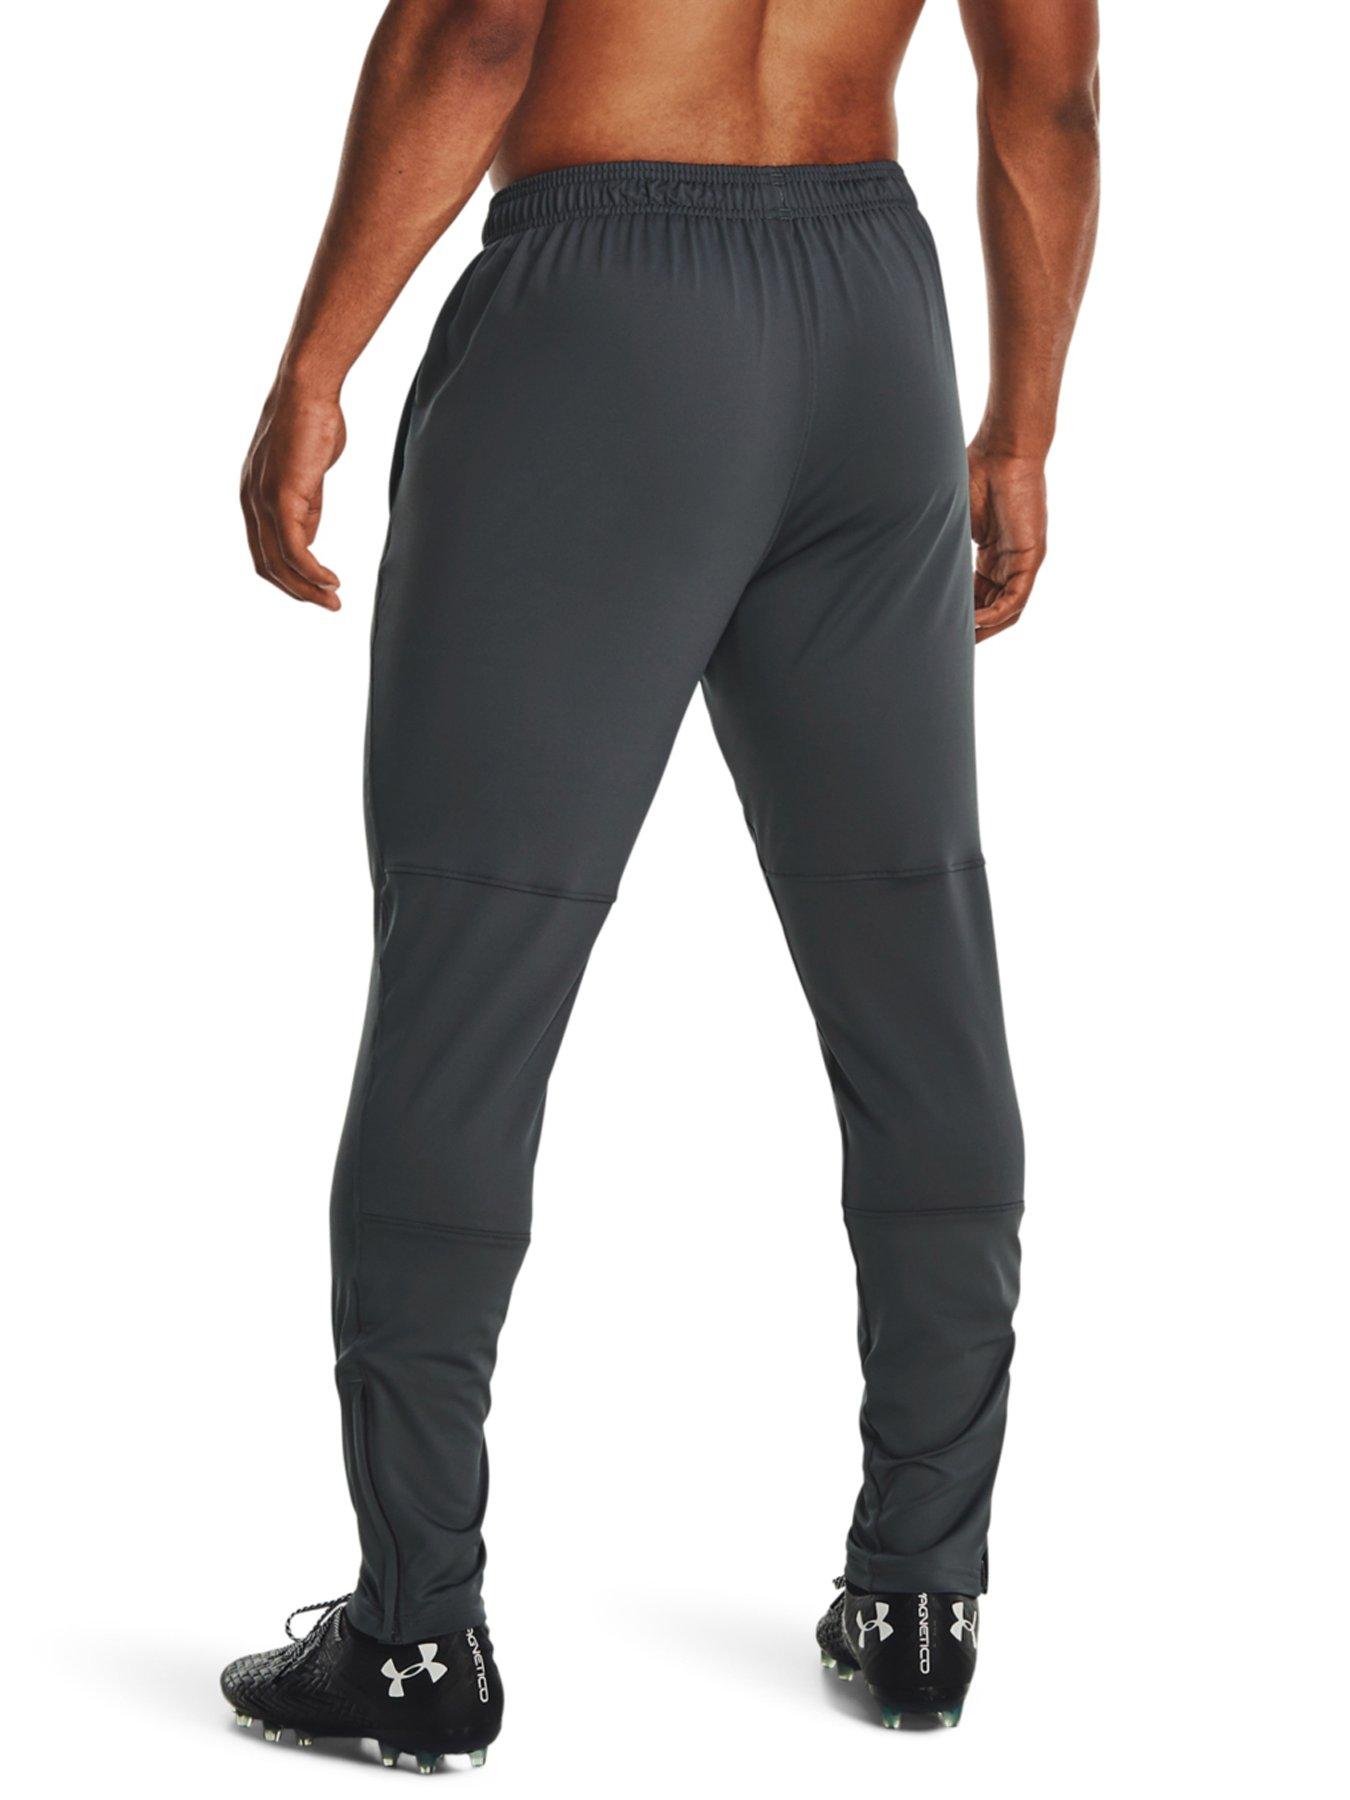 UNDER ARMOUR Challenger Pants - Grey